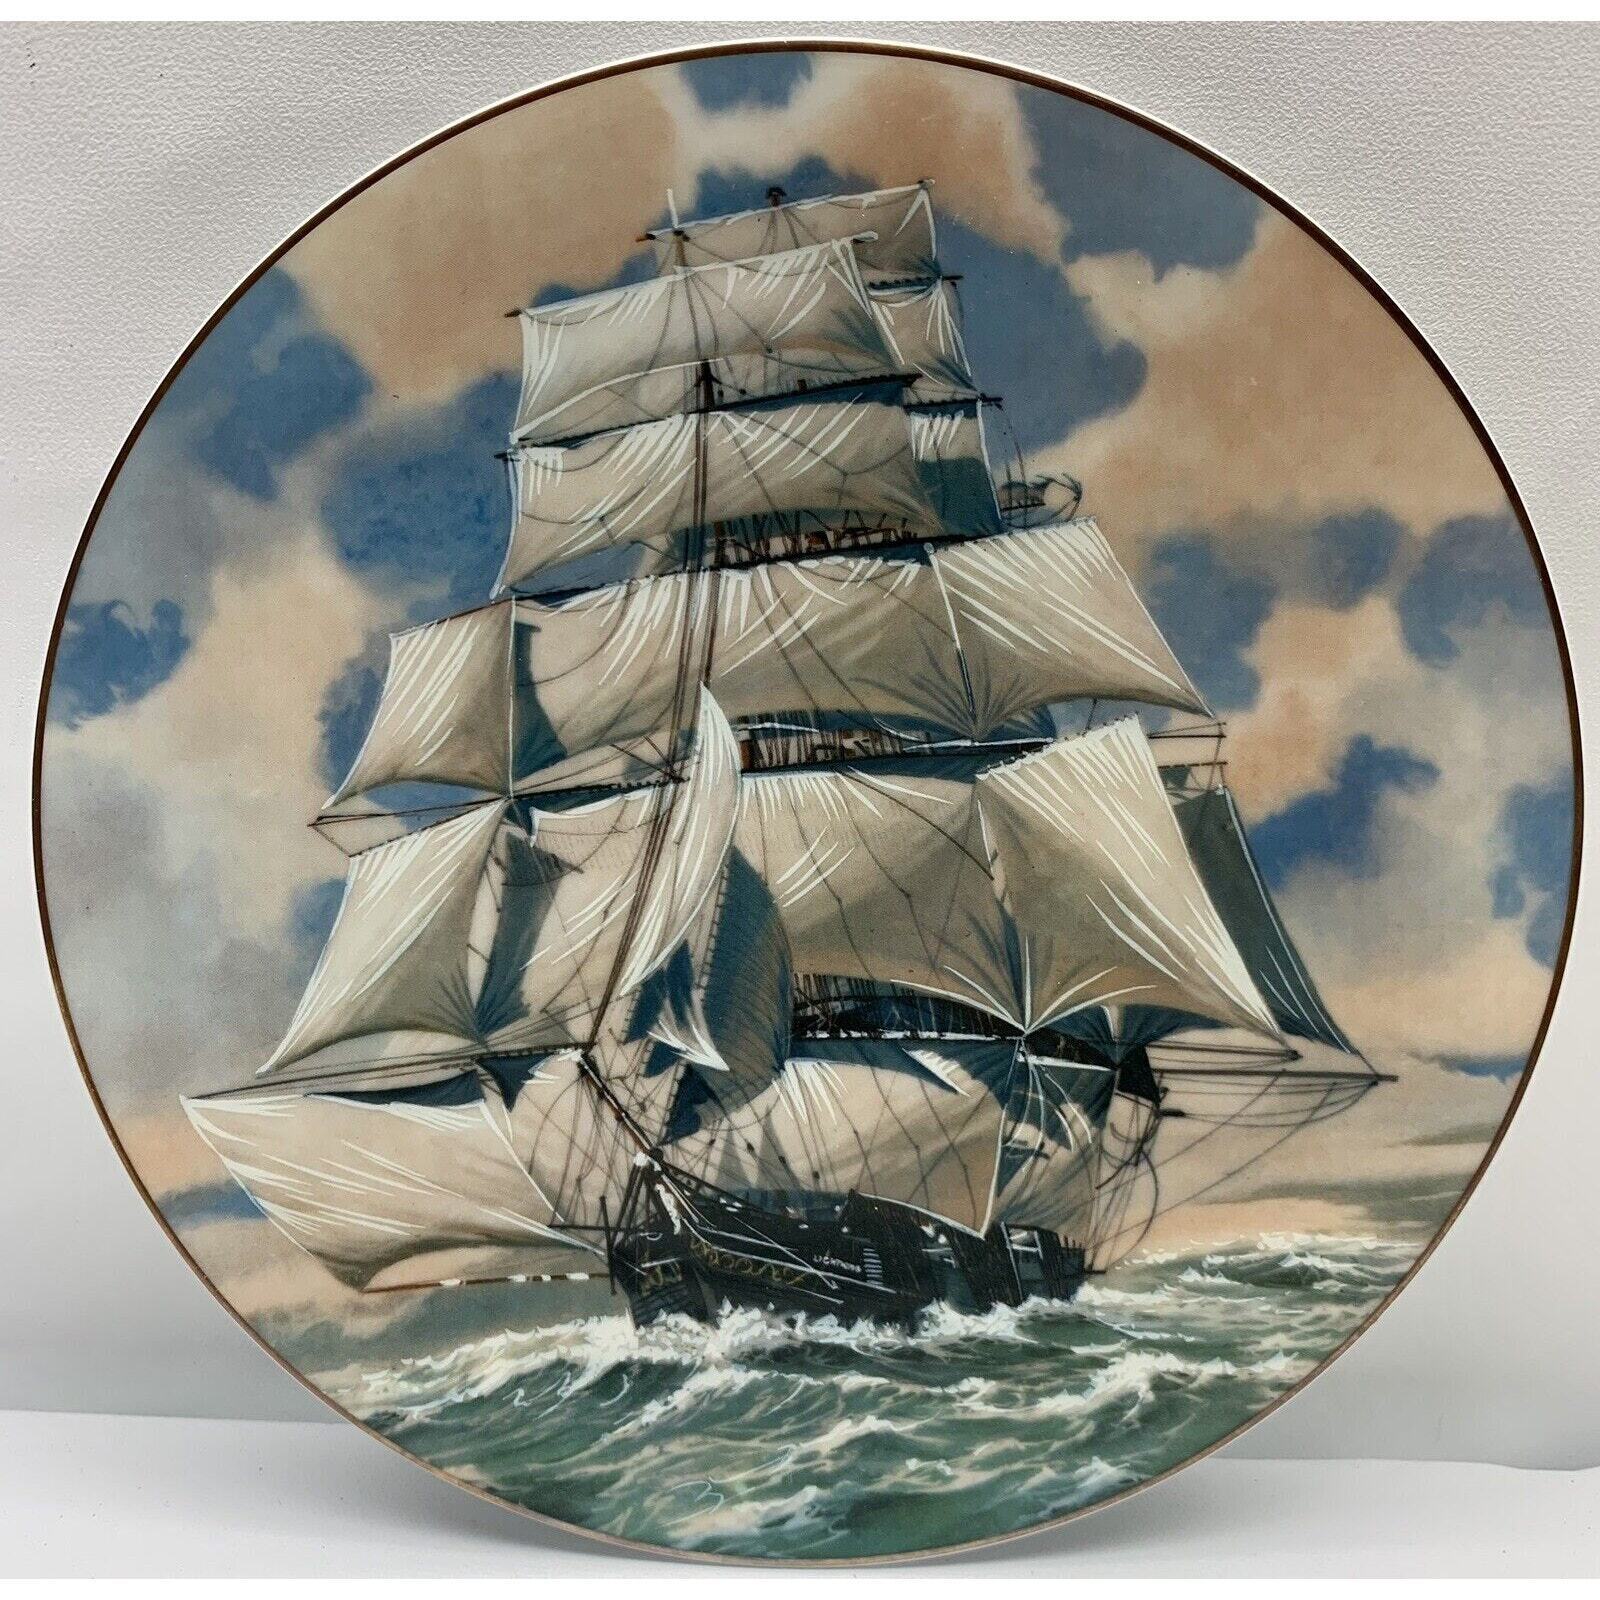 Rosenthal Group Danbury Mint Great American Sailing Ships Plate The Lightning